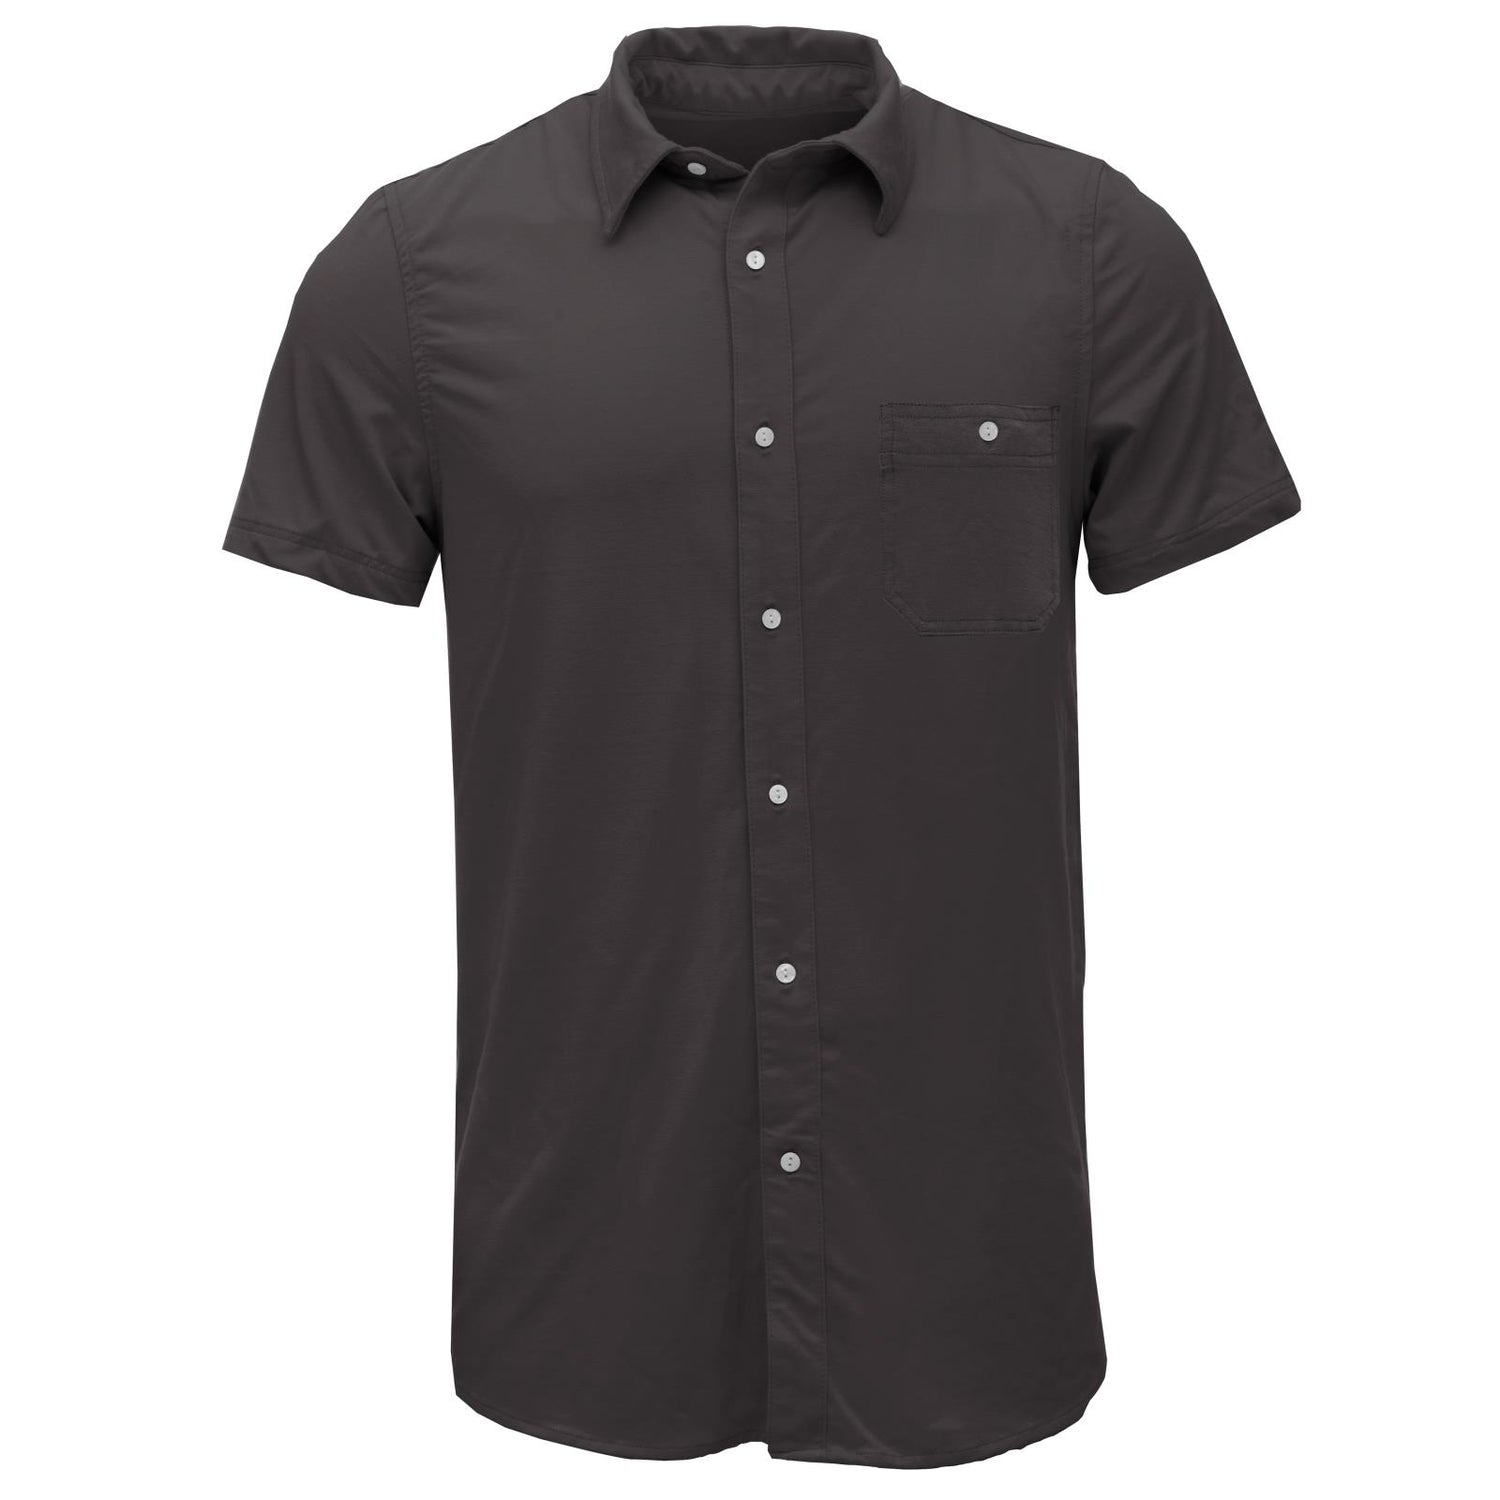 Men's Short Sleeve Woven Button Down Shirt with Pocket in Midnight